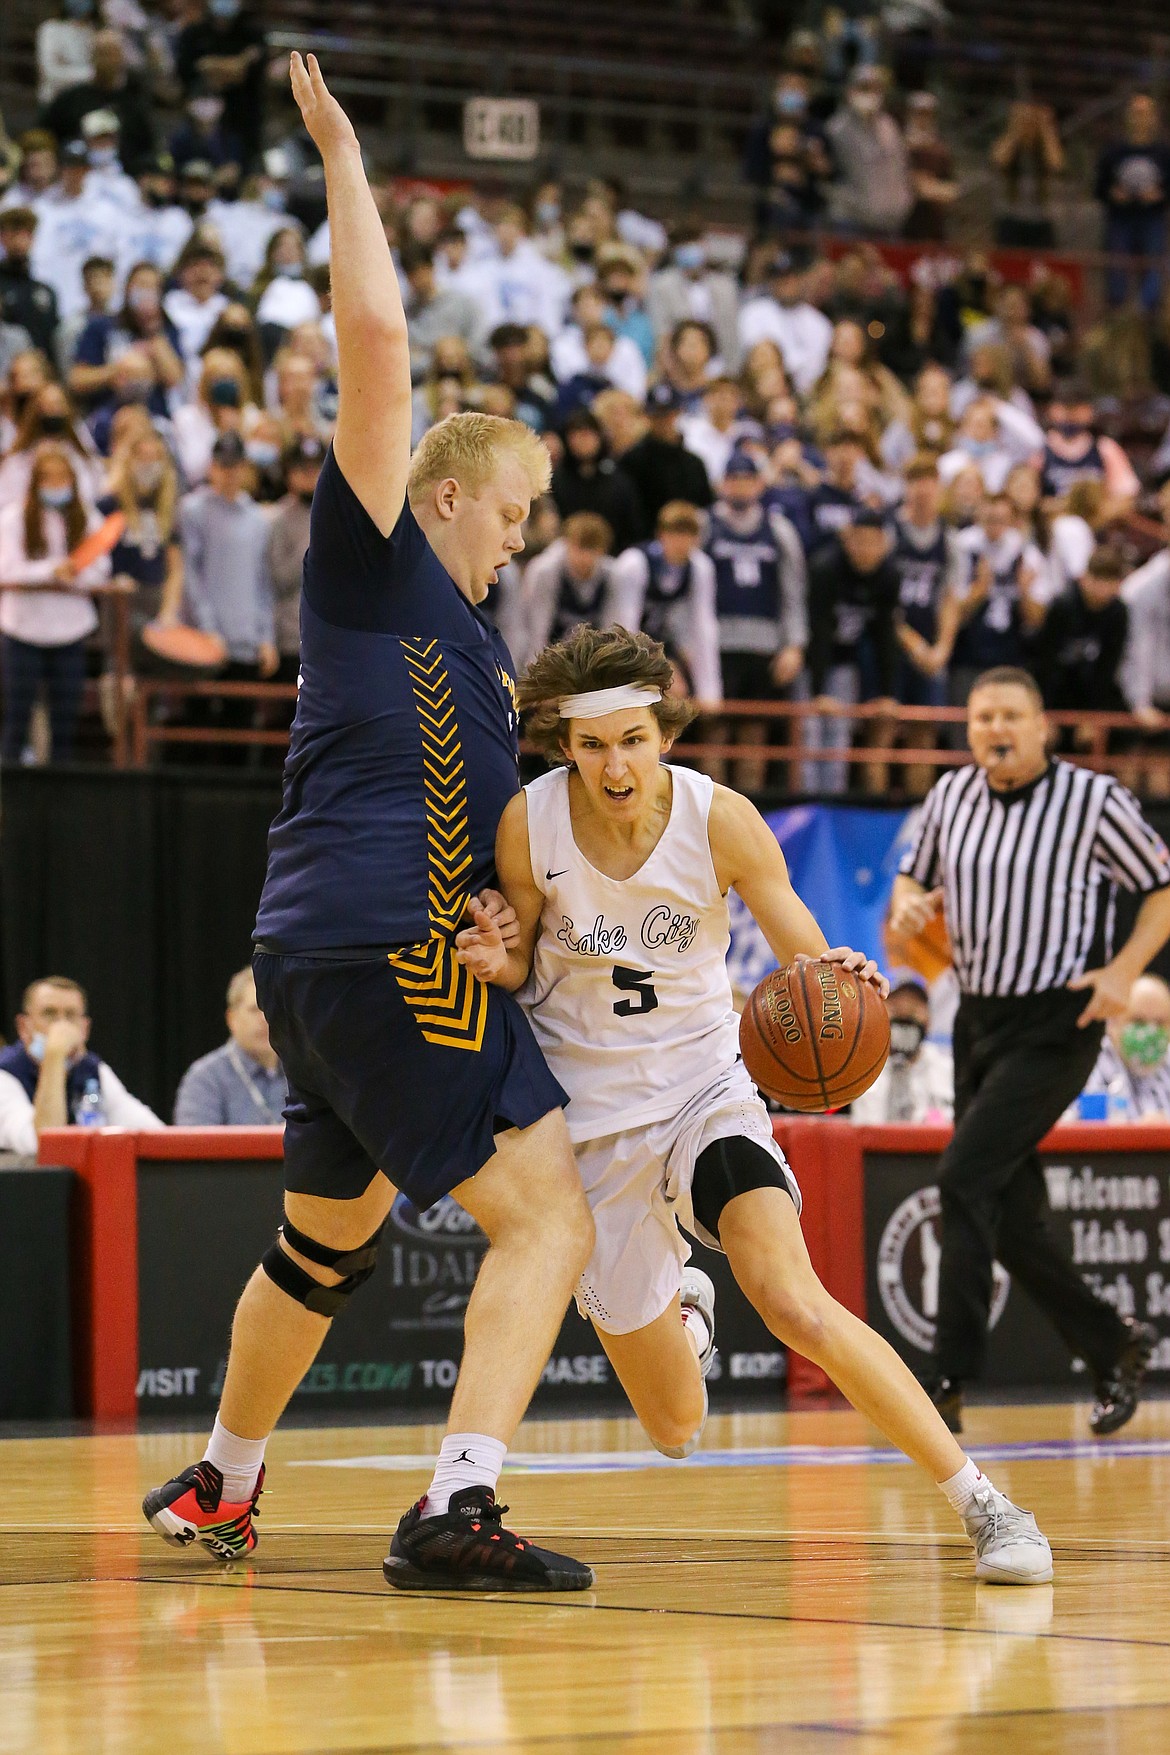 JASON DUCHOW PHOTOGRAPHY
Jack Kiesbuy, right, of Lake City tries to drive around Brody Rowbury of Meridian in the state 5A championship game Saturday night at the Ford Idaho Center in Nampa.